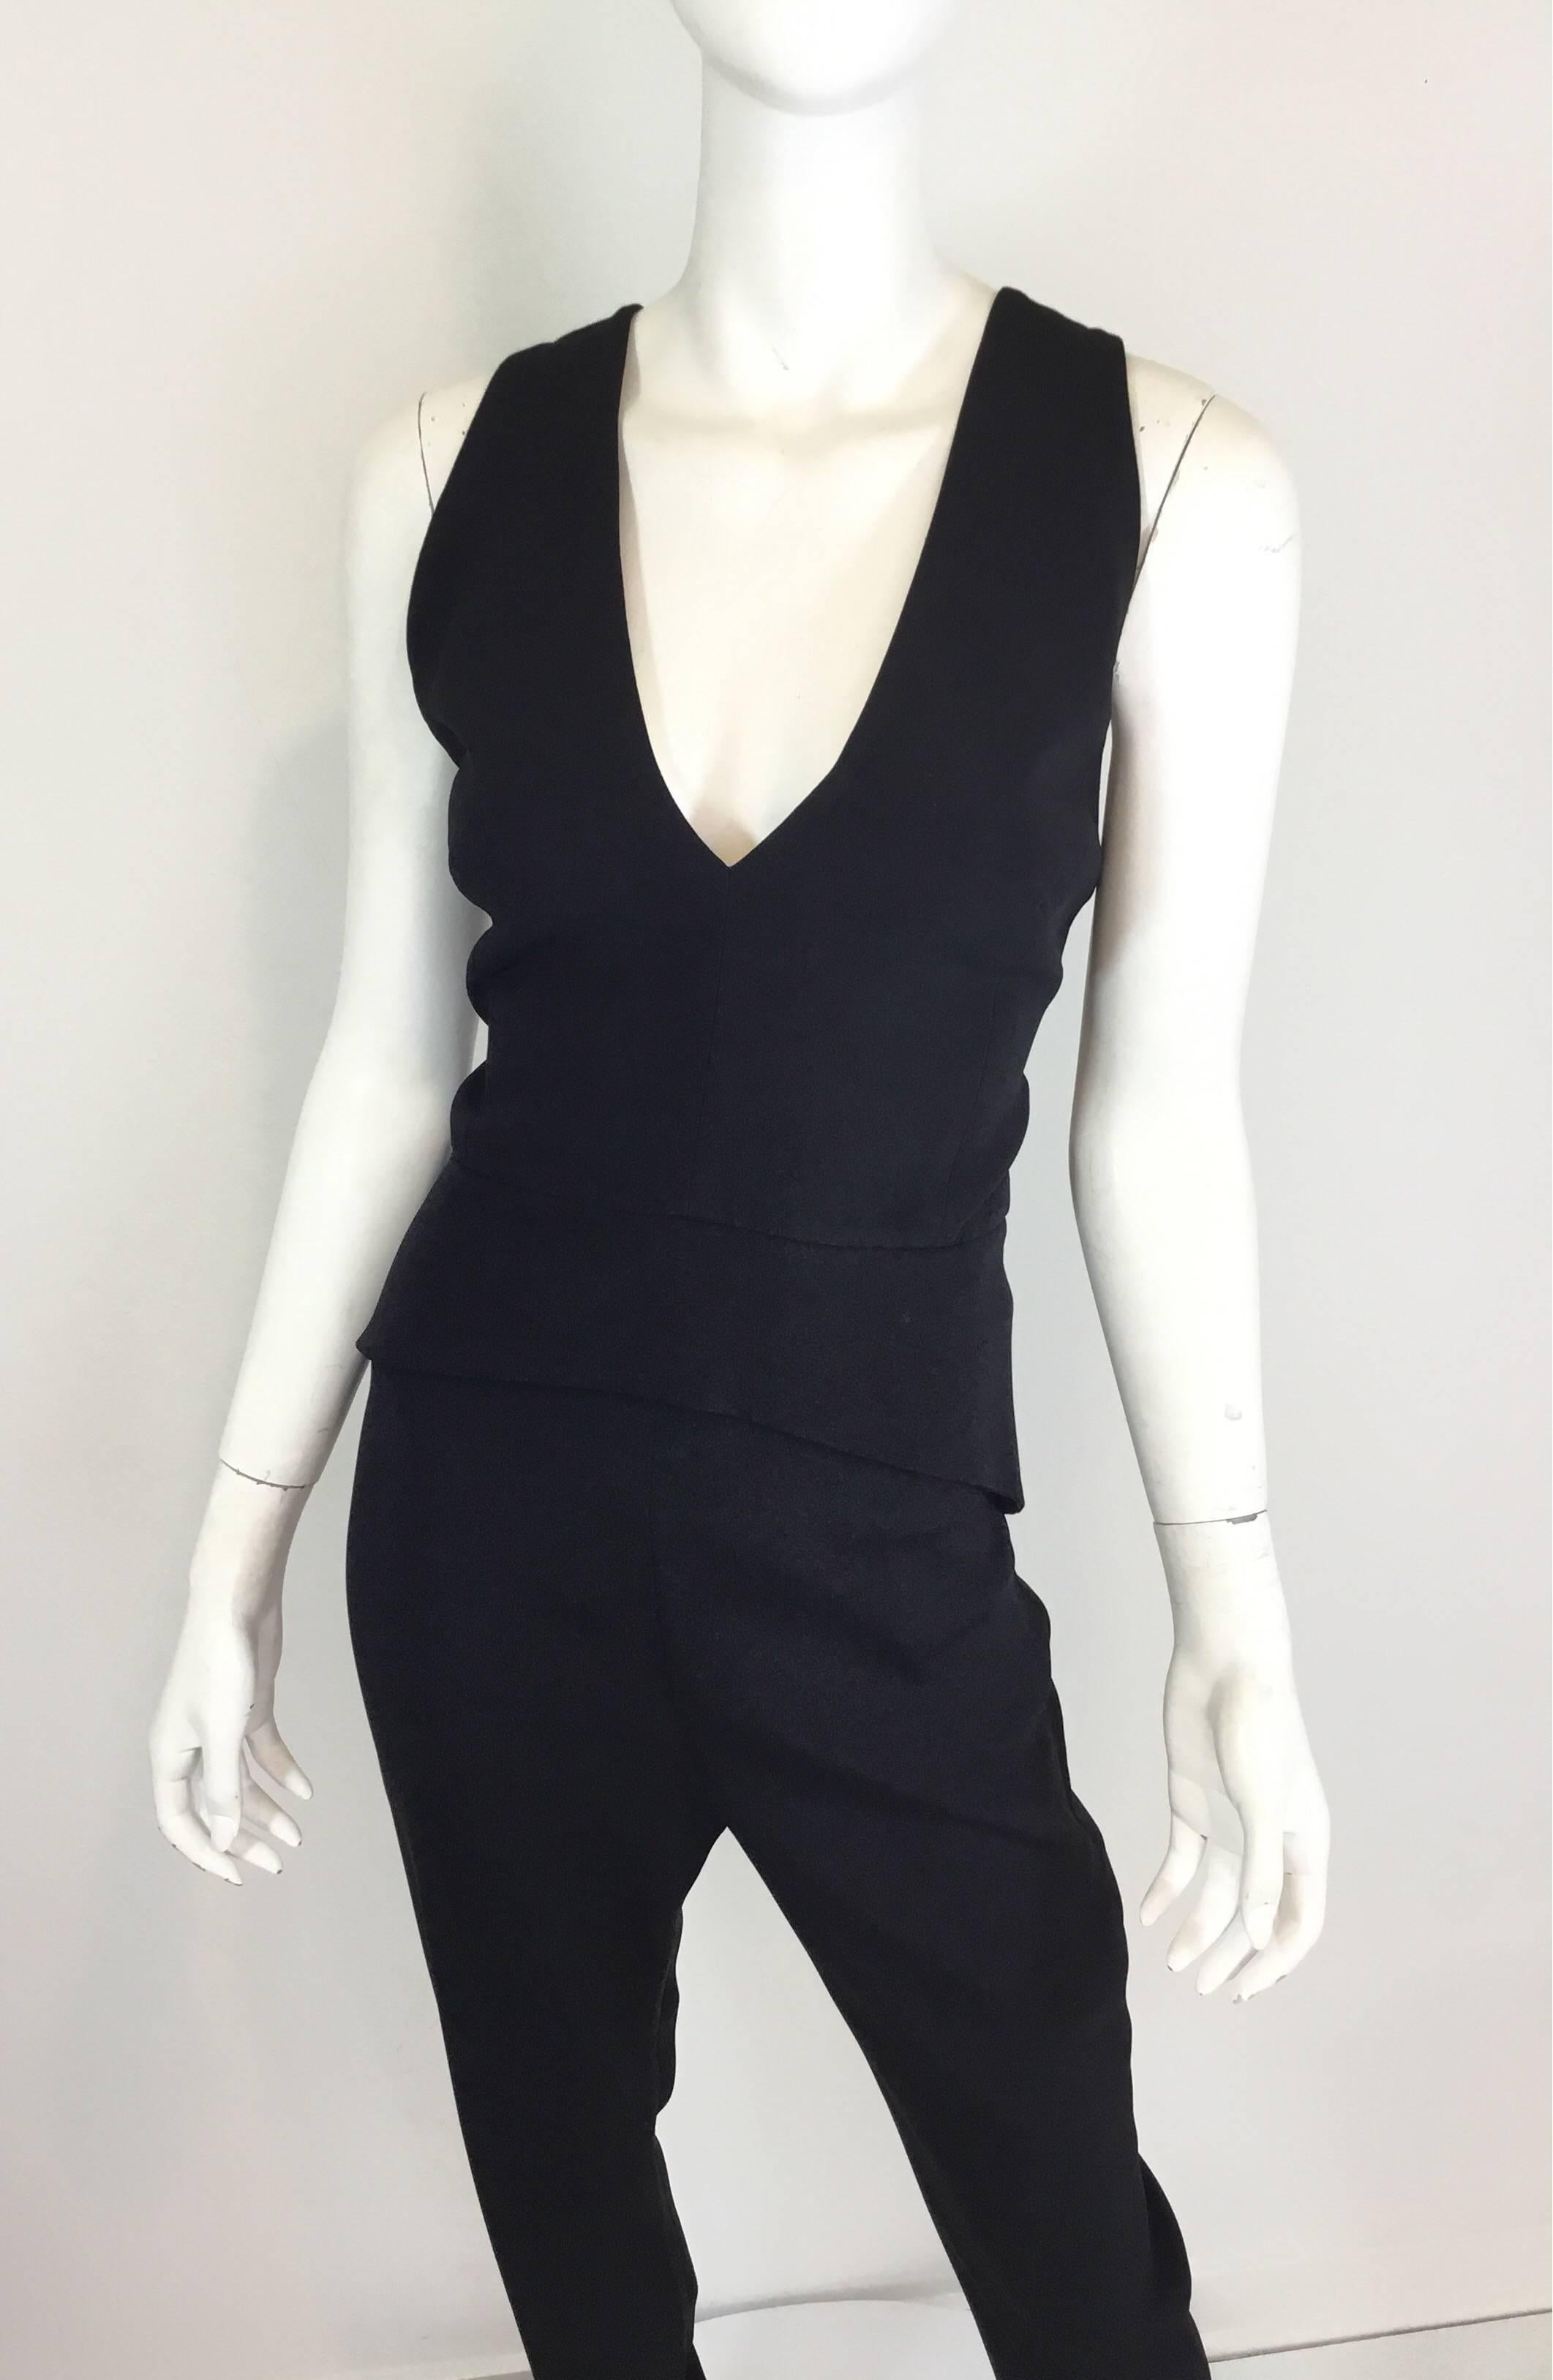 Brandon Maxwell jumpsuit is new with tags and a size 6. Jumpsuit features crossover straps at the back with button fastenings, a back zipper closure, and peplum waist. 

Bust 34'', waist 28'', hips 36'', inseam 31'', length 49''(back center to hem)